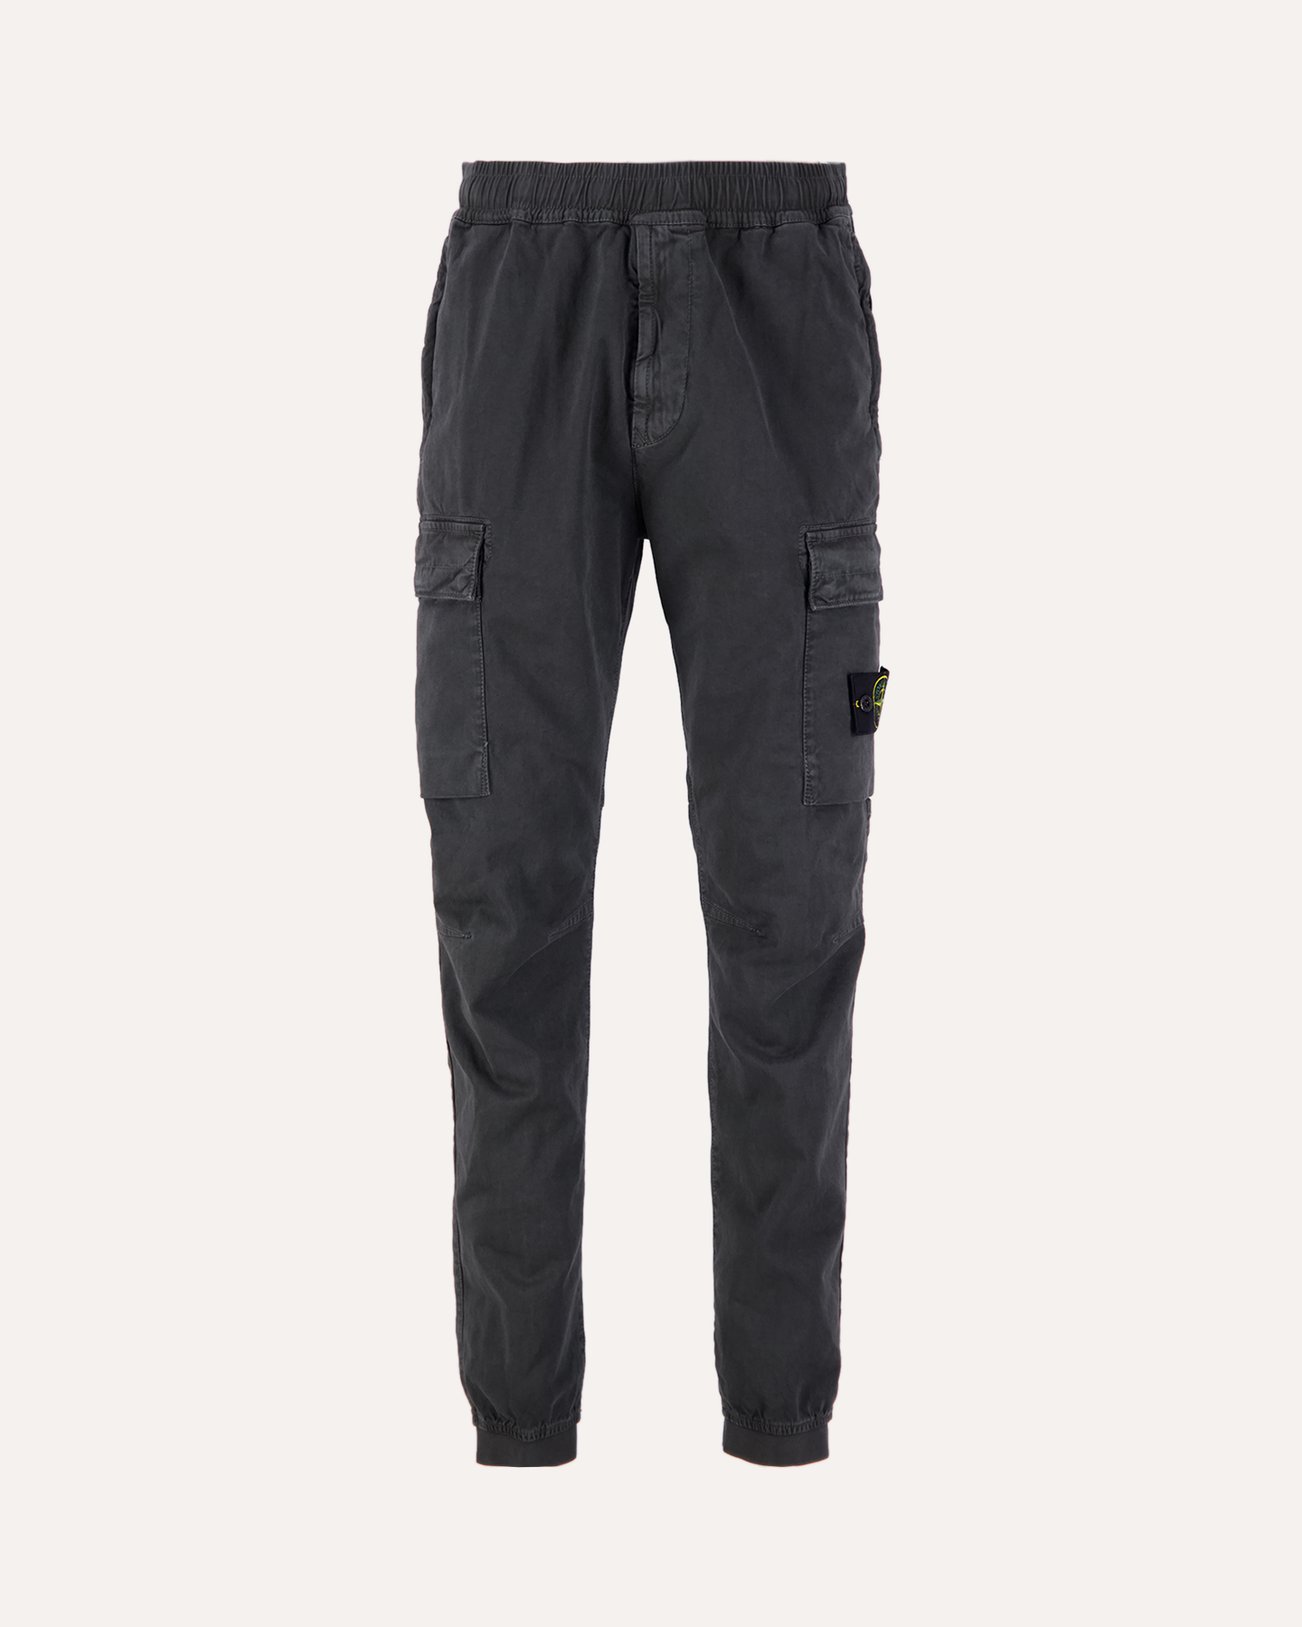 Stone Island 313L1 Cotton Twill Garment Dyed 'Old'Effect Cargo Pants GRIJS 1